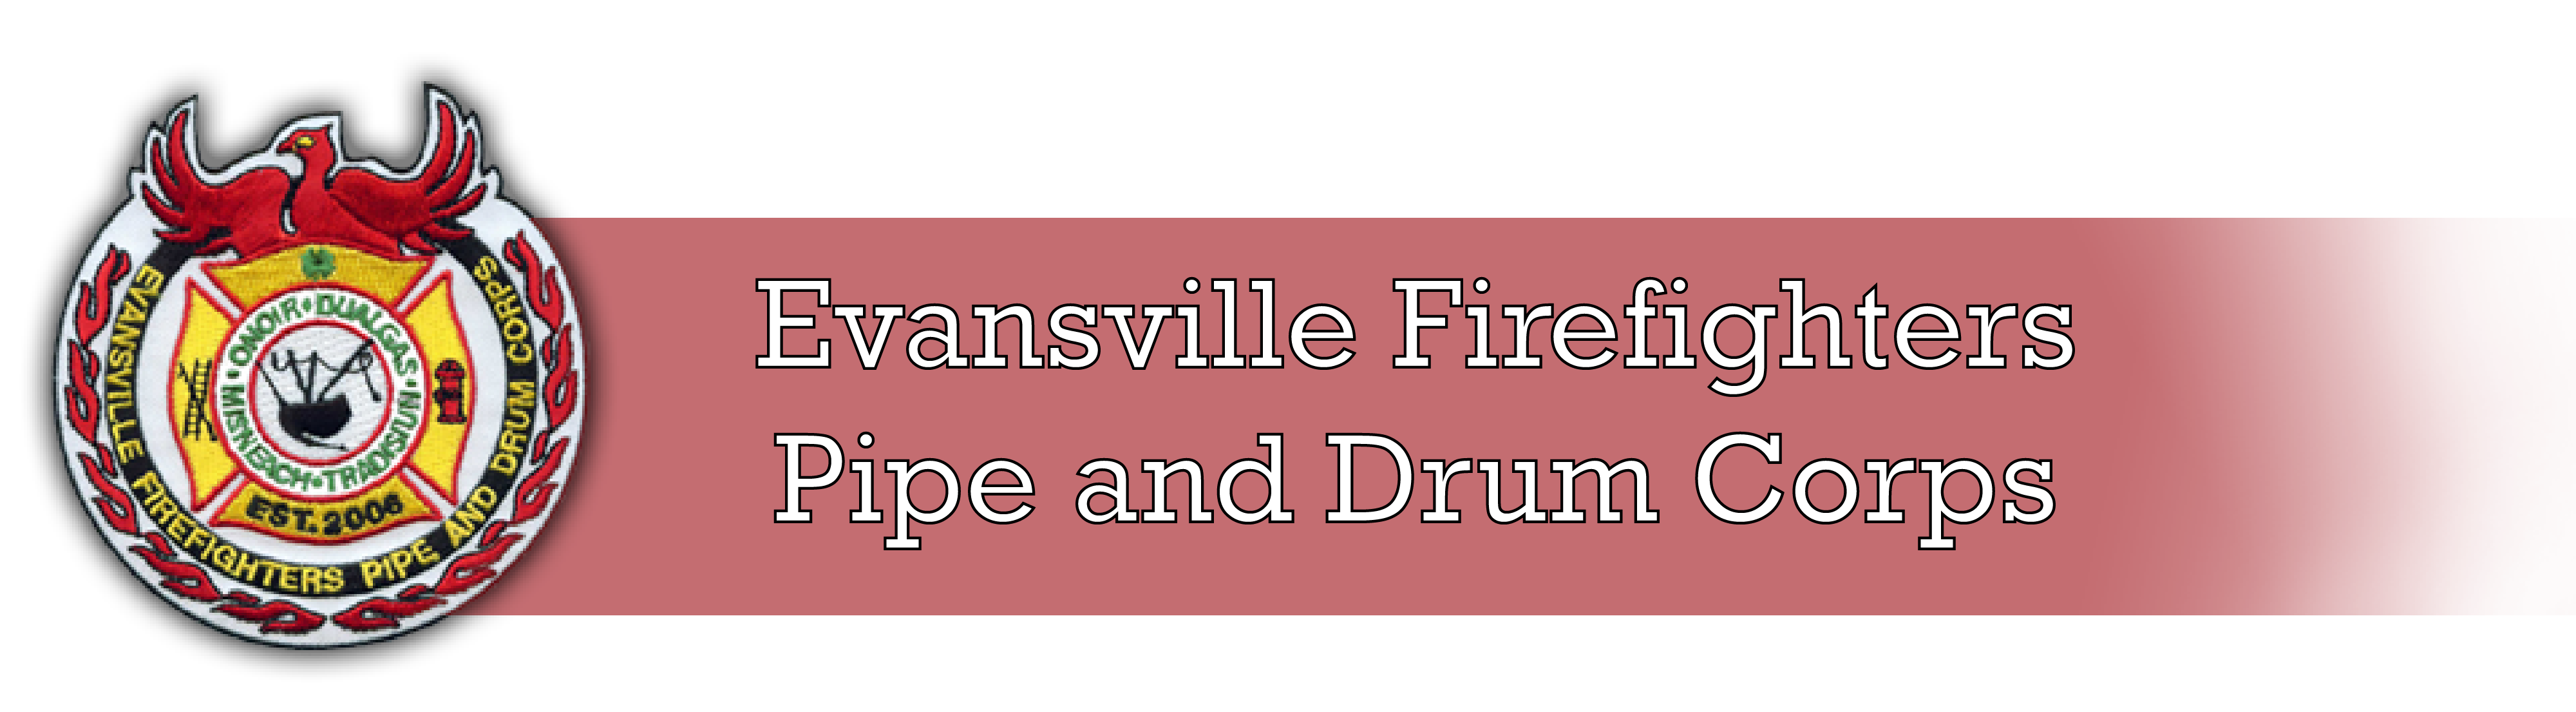 Evansville Firefighters Pipe And Drum Corps